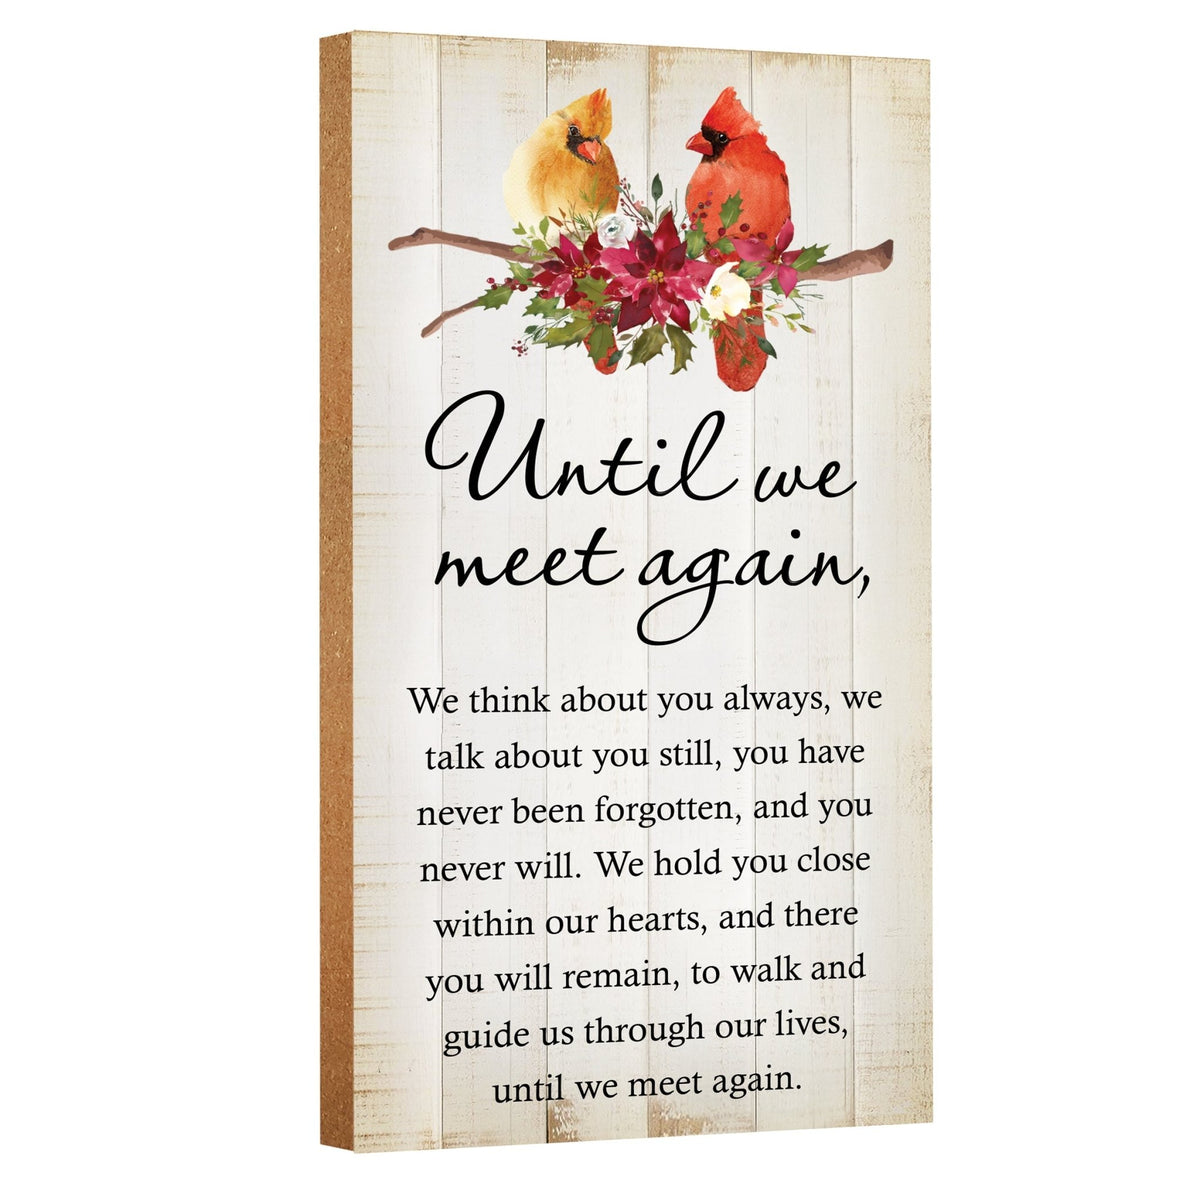 A wooden memorial wall plaque with a cardinal design - Lifesong Milestones Cardinal Memorial Wooden Wall Plaque for Home Decorations.